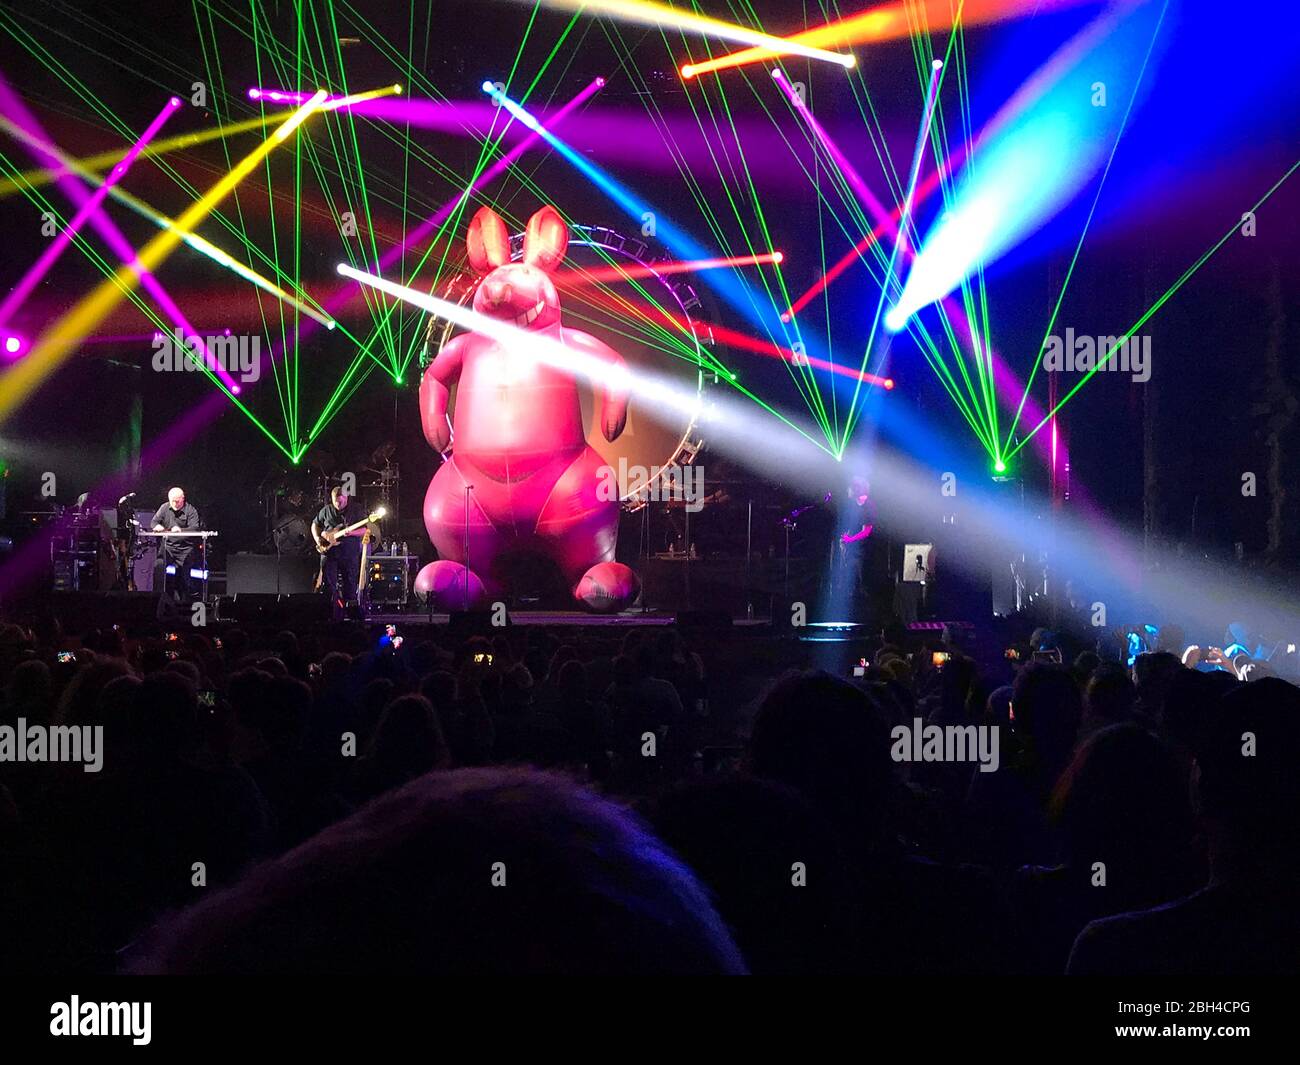 Colorful laser light show and large inflatable kangaroo are part of the performance by the Australian Pink Floyd cover band's show in Los Angeles, CA Stock Photo